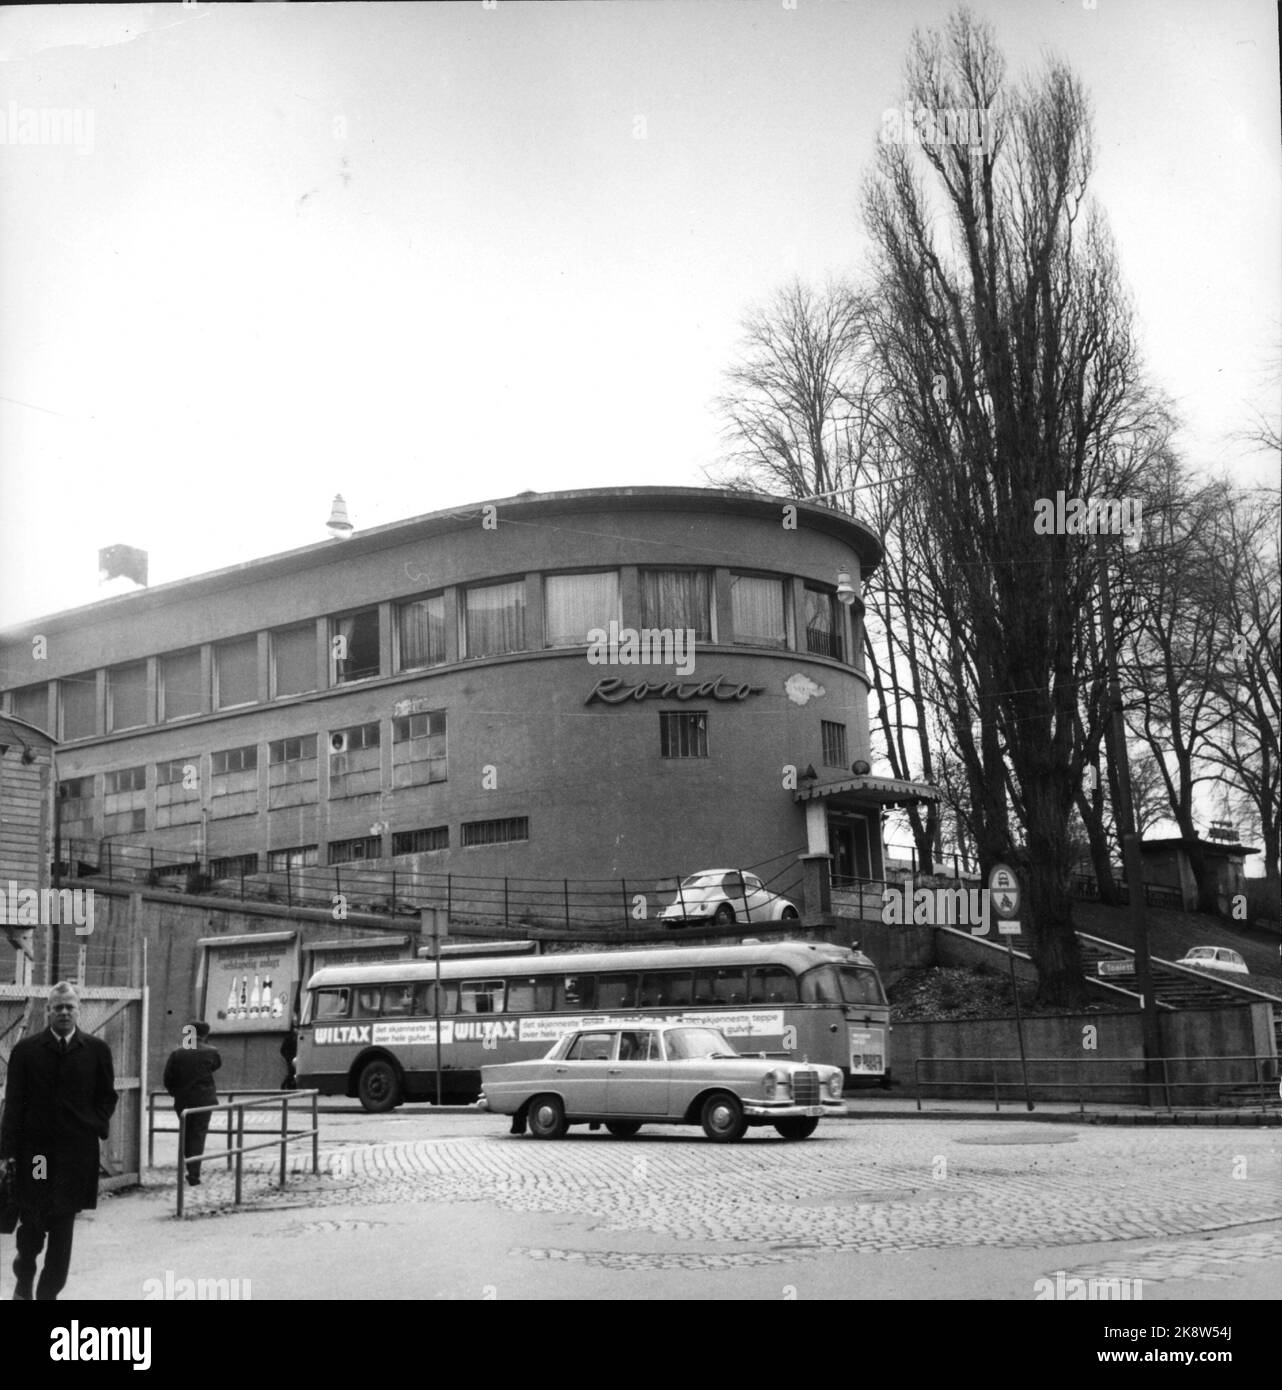 Oslo 21.04.1970. Restaurant Skansen, Norway's first funk building. Architect: Lars Backer. Listed in 1927, demolished in 1970. The youth restaurant 'Rondo' from 1962-1967 Stock Photo: NTB Stock Photo